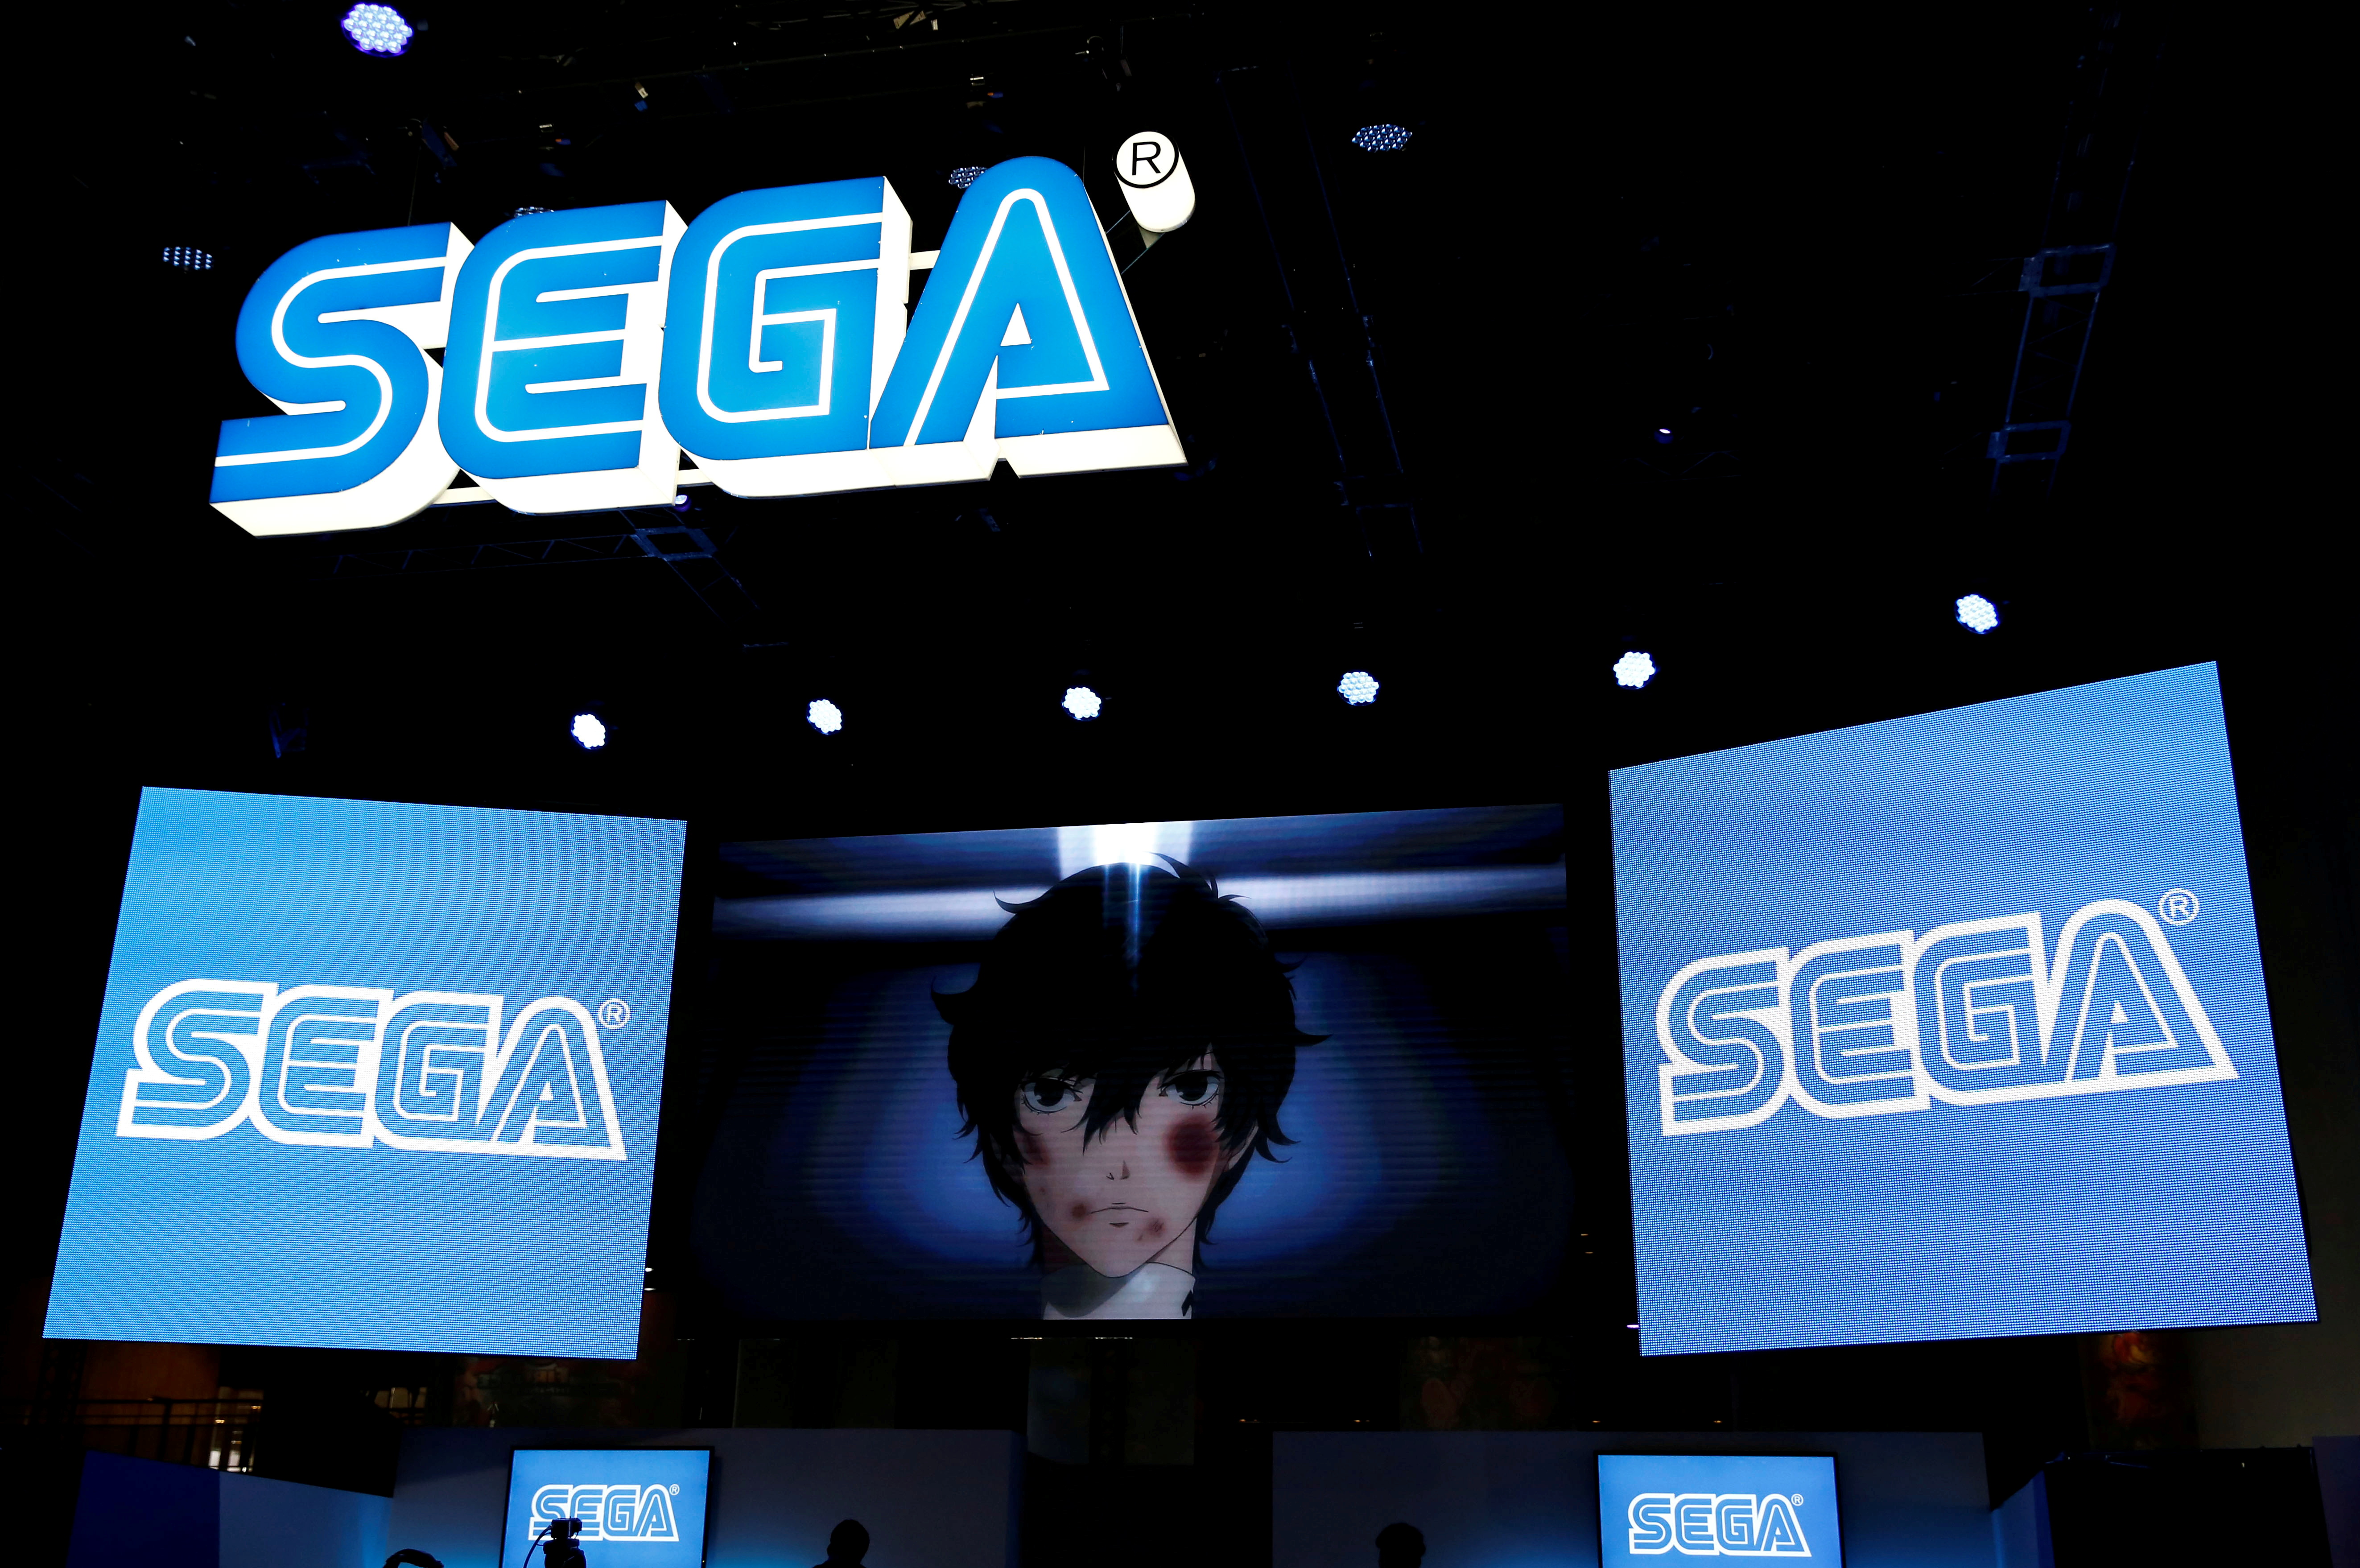 Sega logos are pictured at Tokyo Game Show 2016 in Chiba